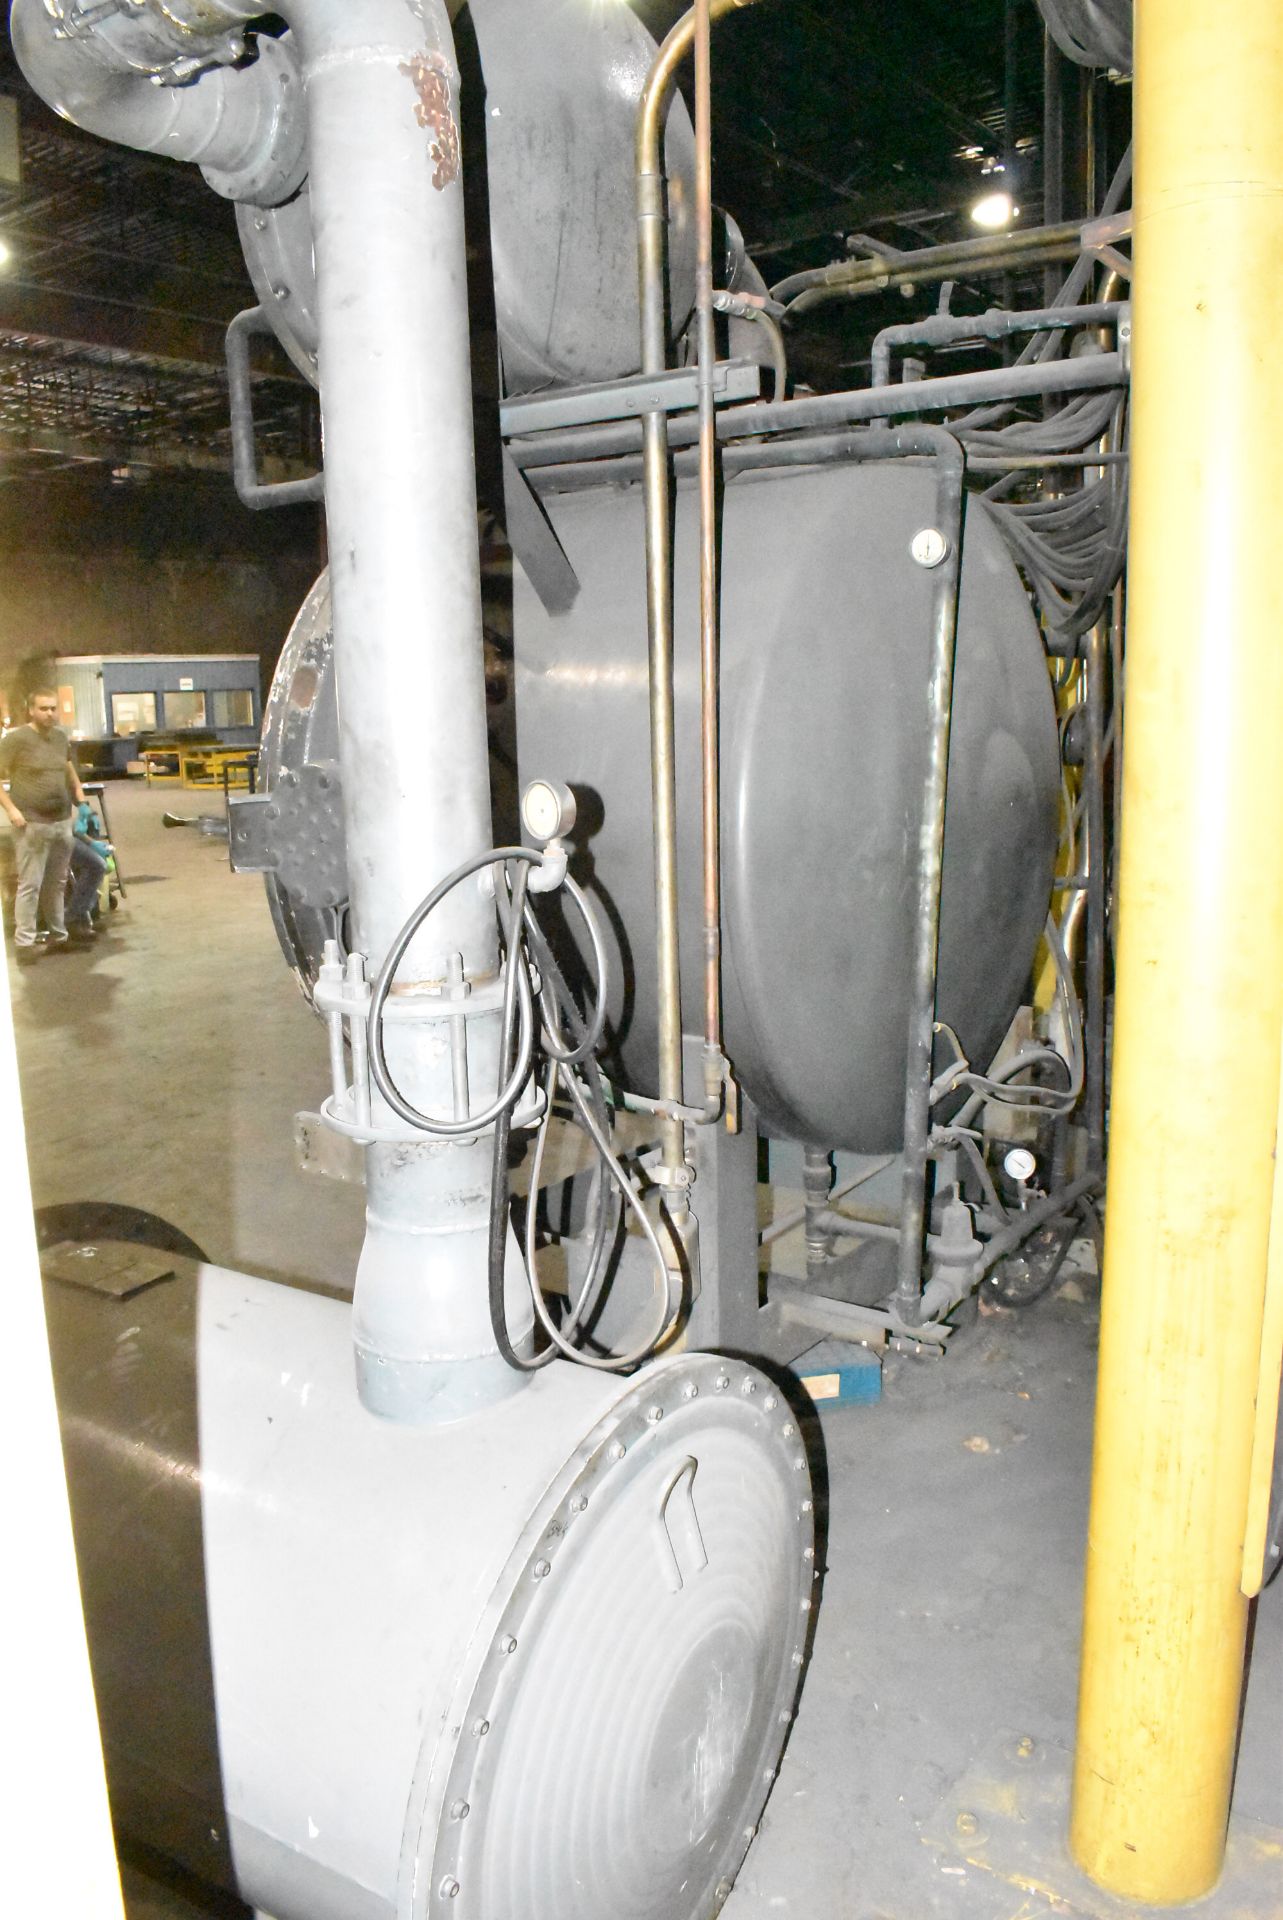 ABAR HR 34 ELECTRIC VACUUM FURNACE WITH 2400 DEGREES F MAX TEMP, 24"Wx24"Hx36"D APPROX SIZE, 1,000LB - Image 8 of 18